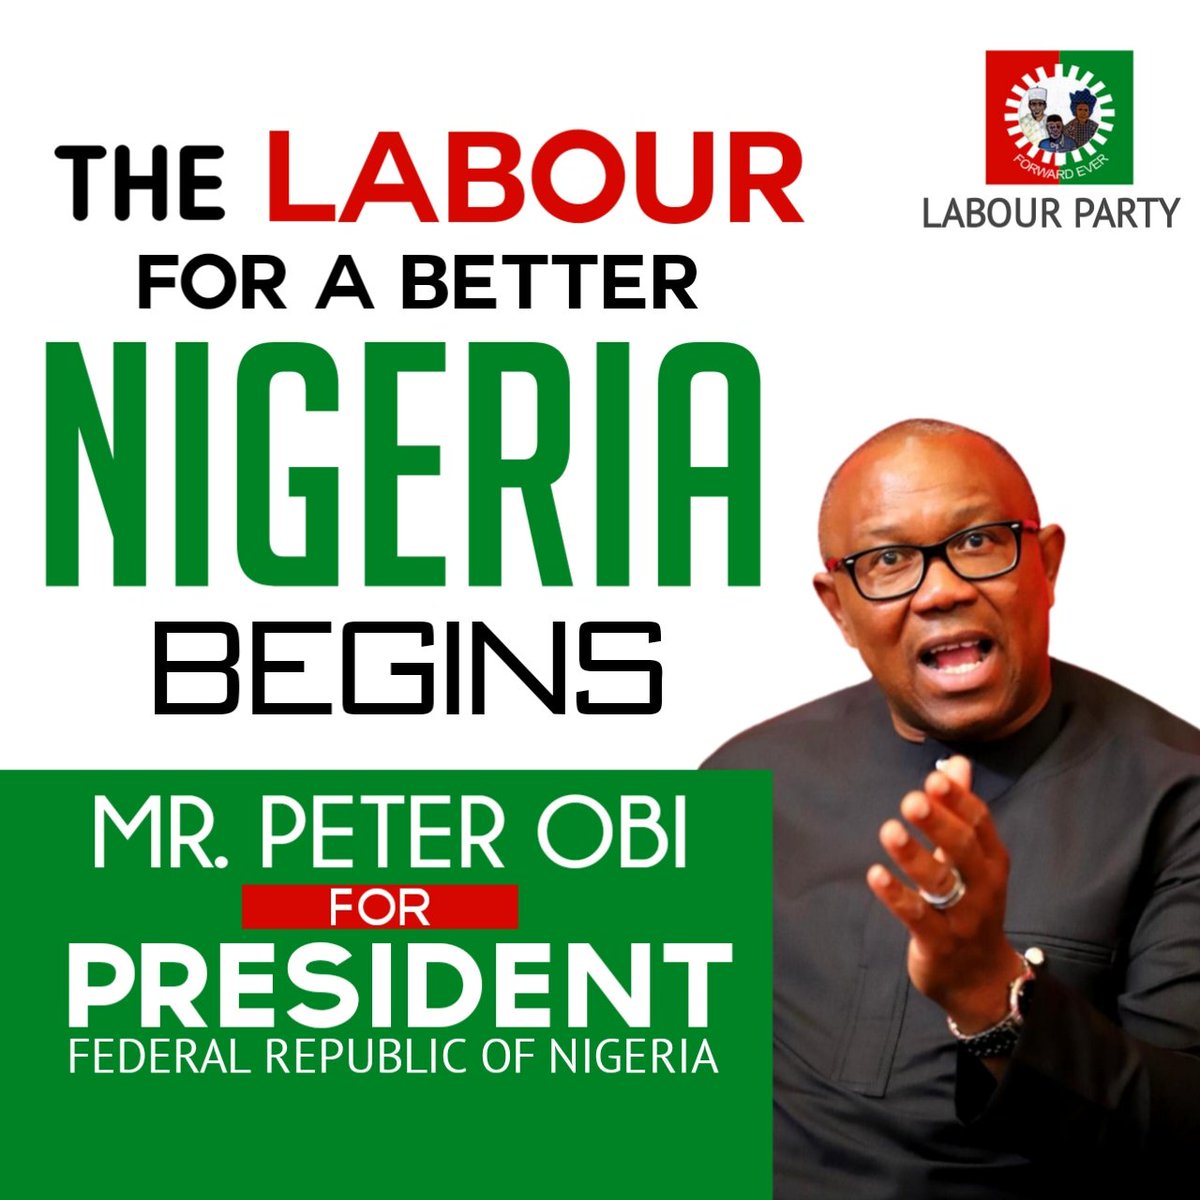 No more DISTRACTIONS, my dear #Obidients 
It's time to #TakeBackNaija for Nigerians via #ObiDatti2023 candidacy.

Focus is on getting @PeterObi into Aso Rock.

#ConsumptionToProduction

VOTE WISELY ❗

Vote Peter Obi & Datti Baba-Ahmed